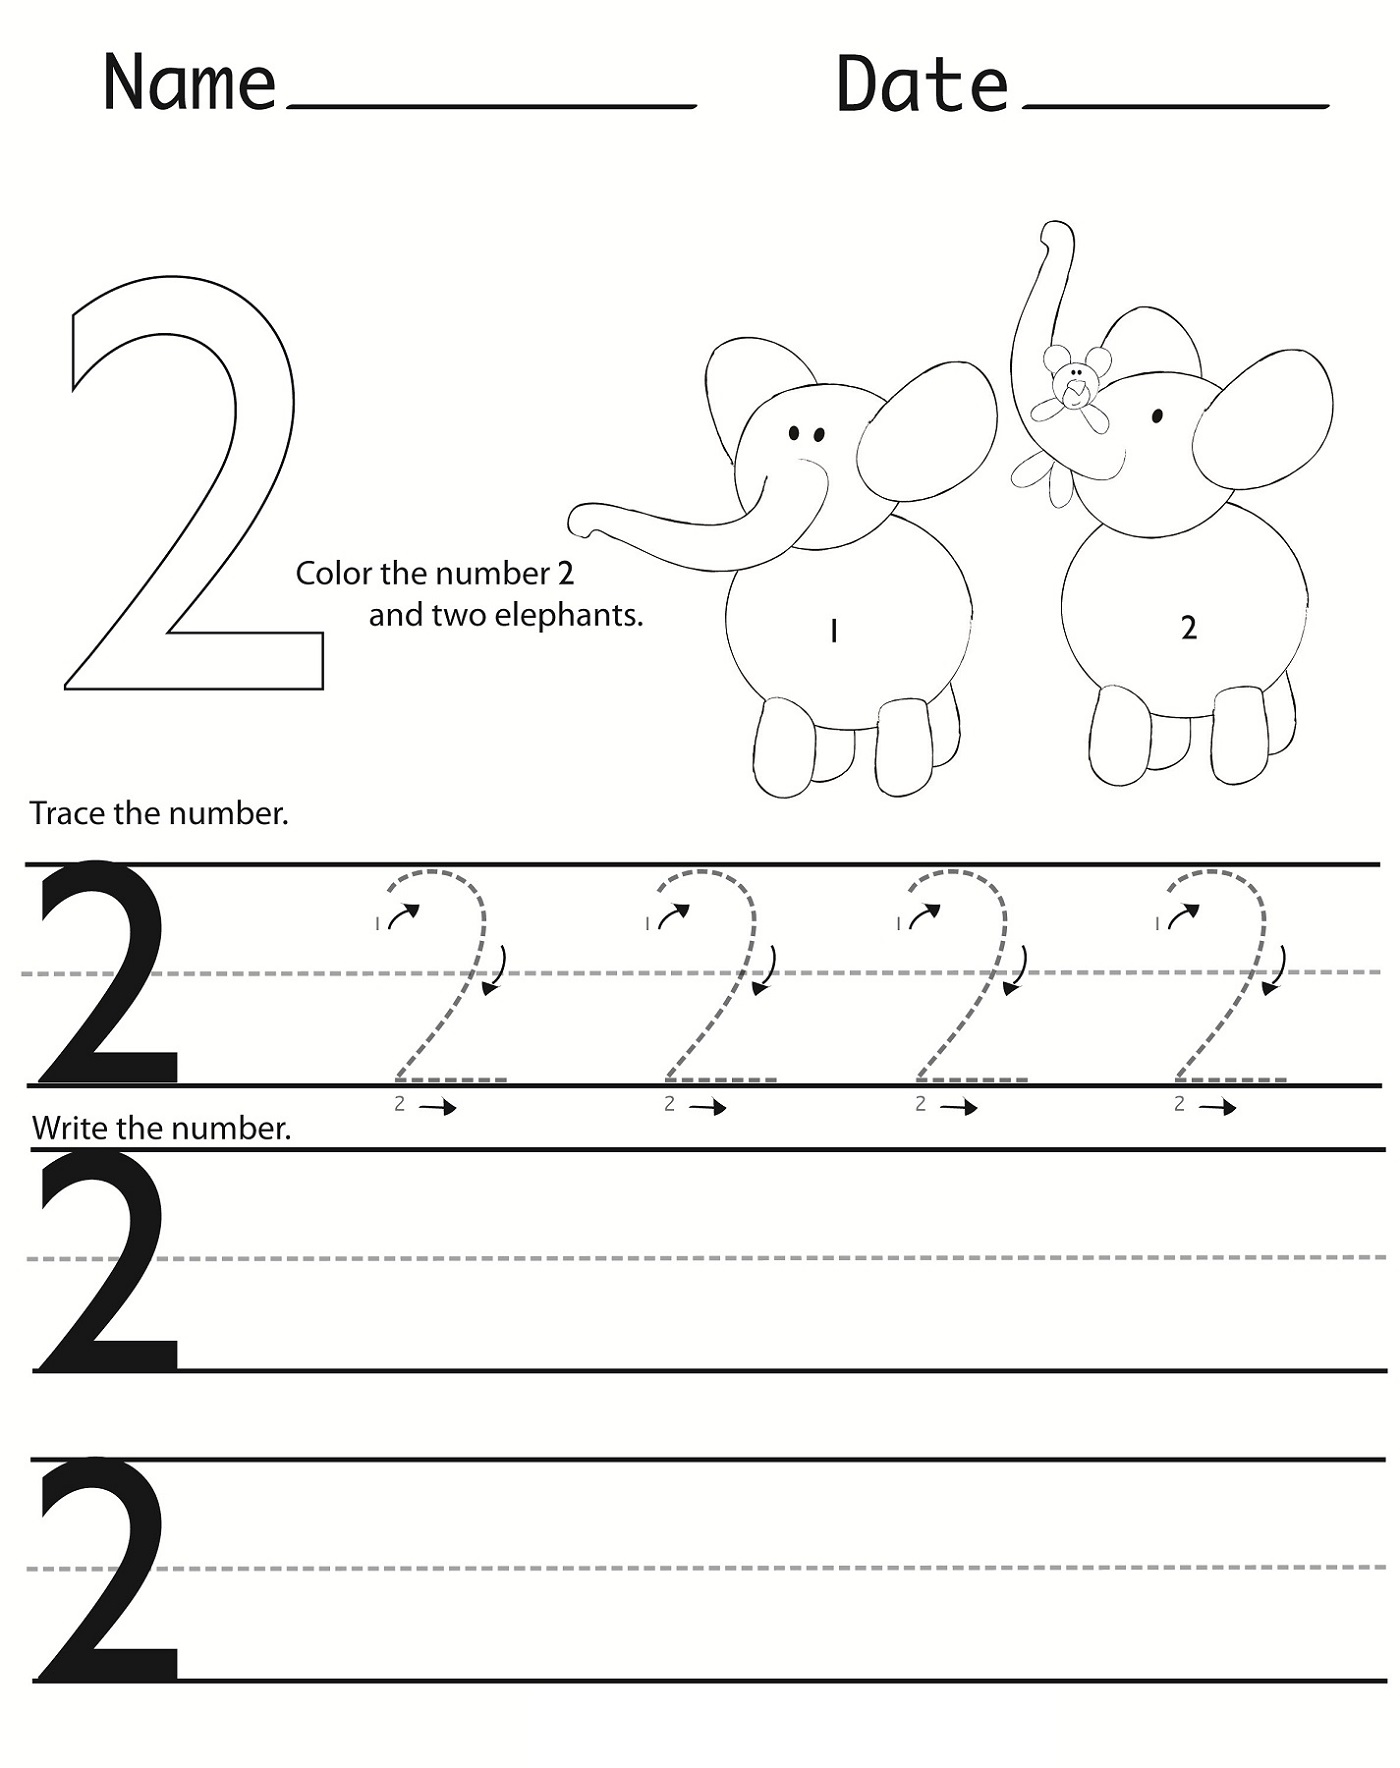 Writing Numbers Worksheet For Kids 101 Activity Practice Writing 